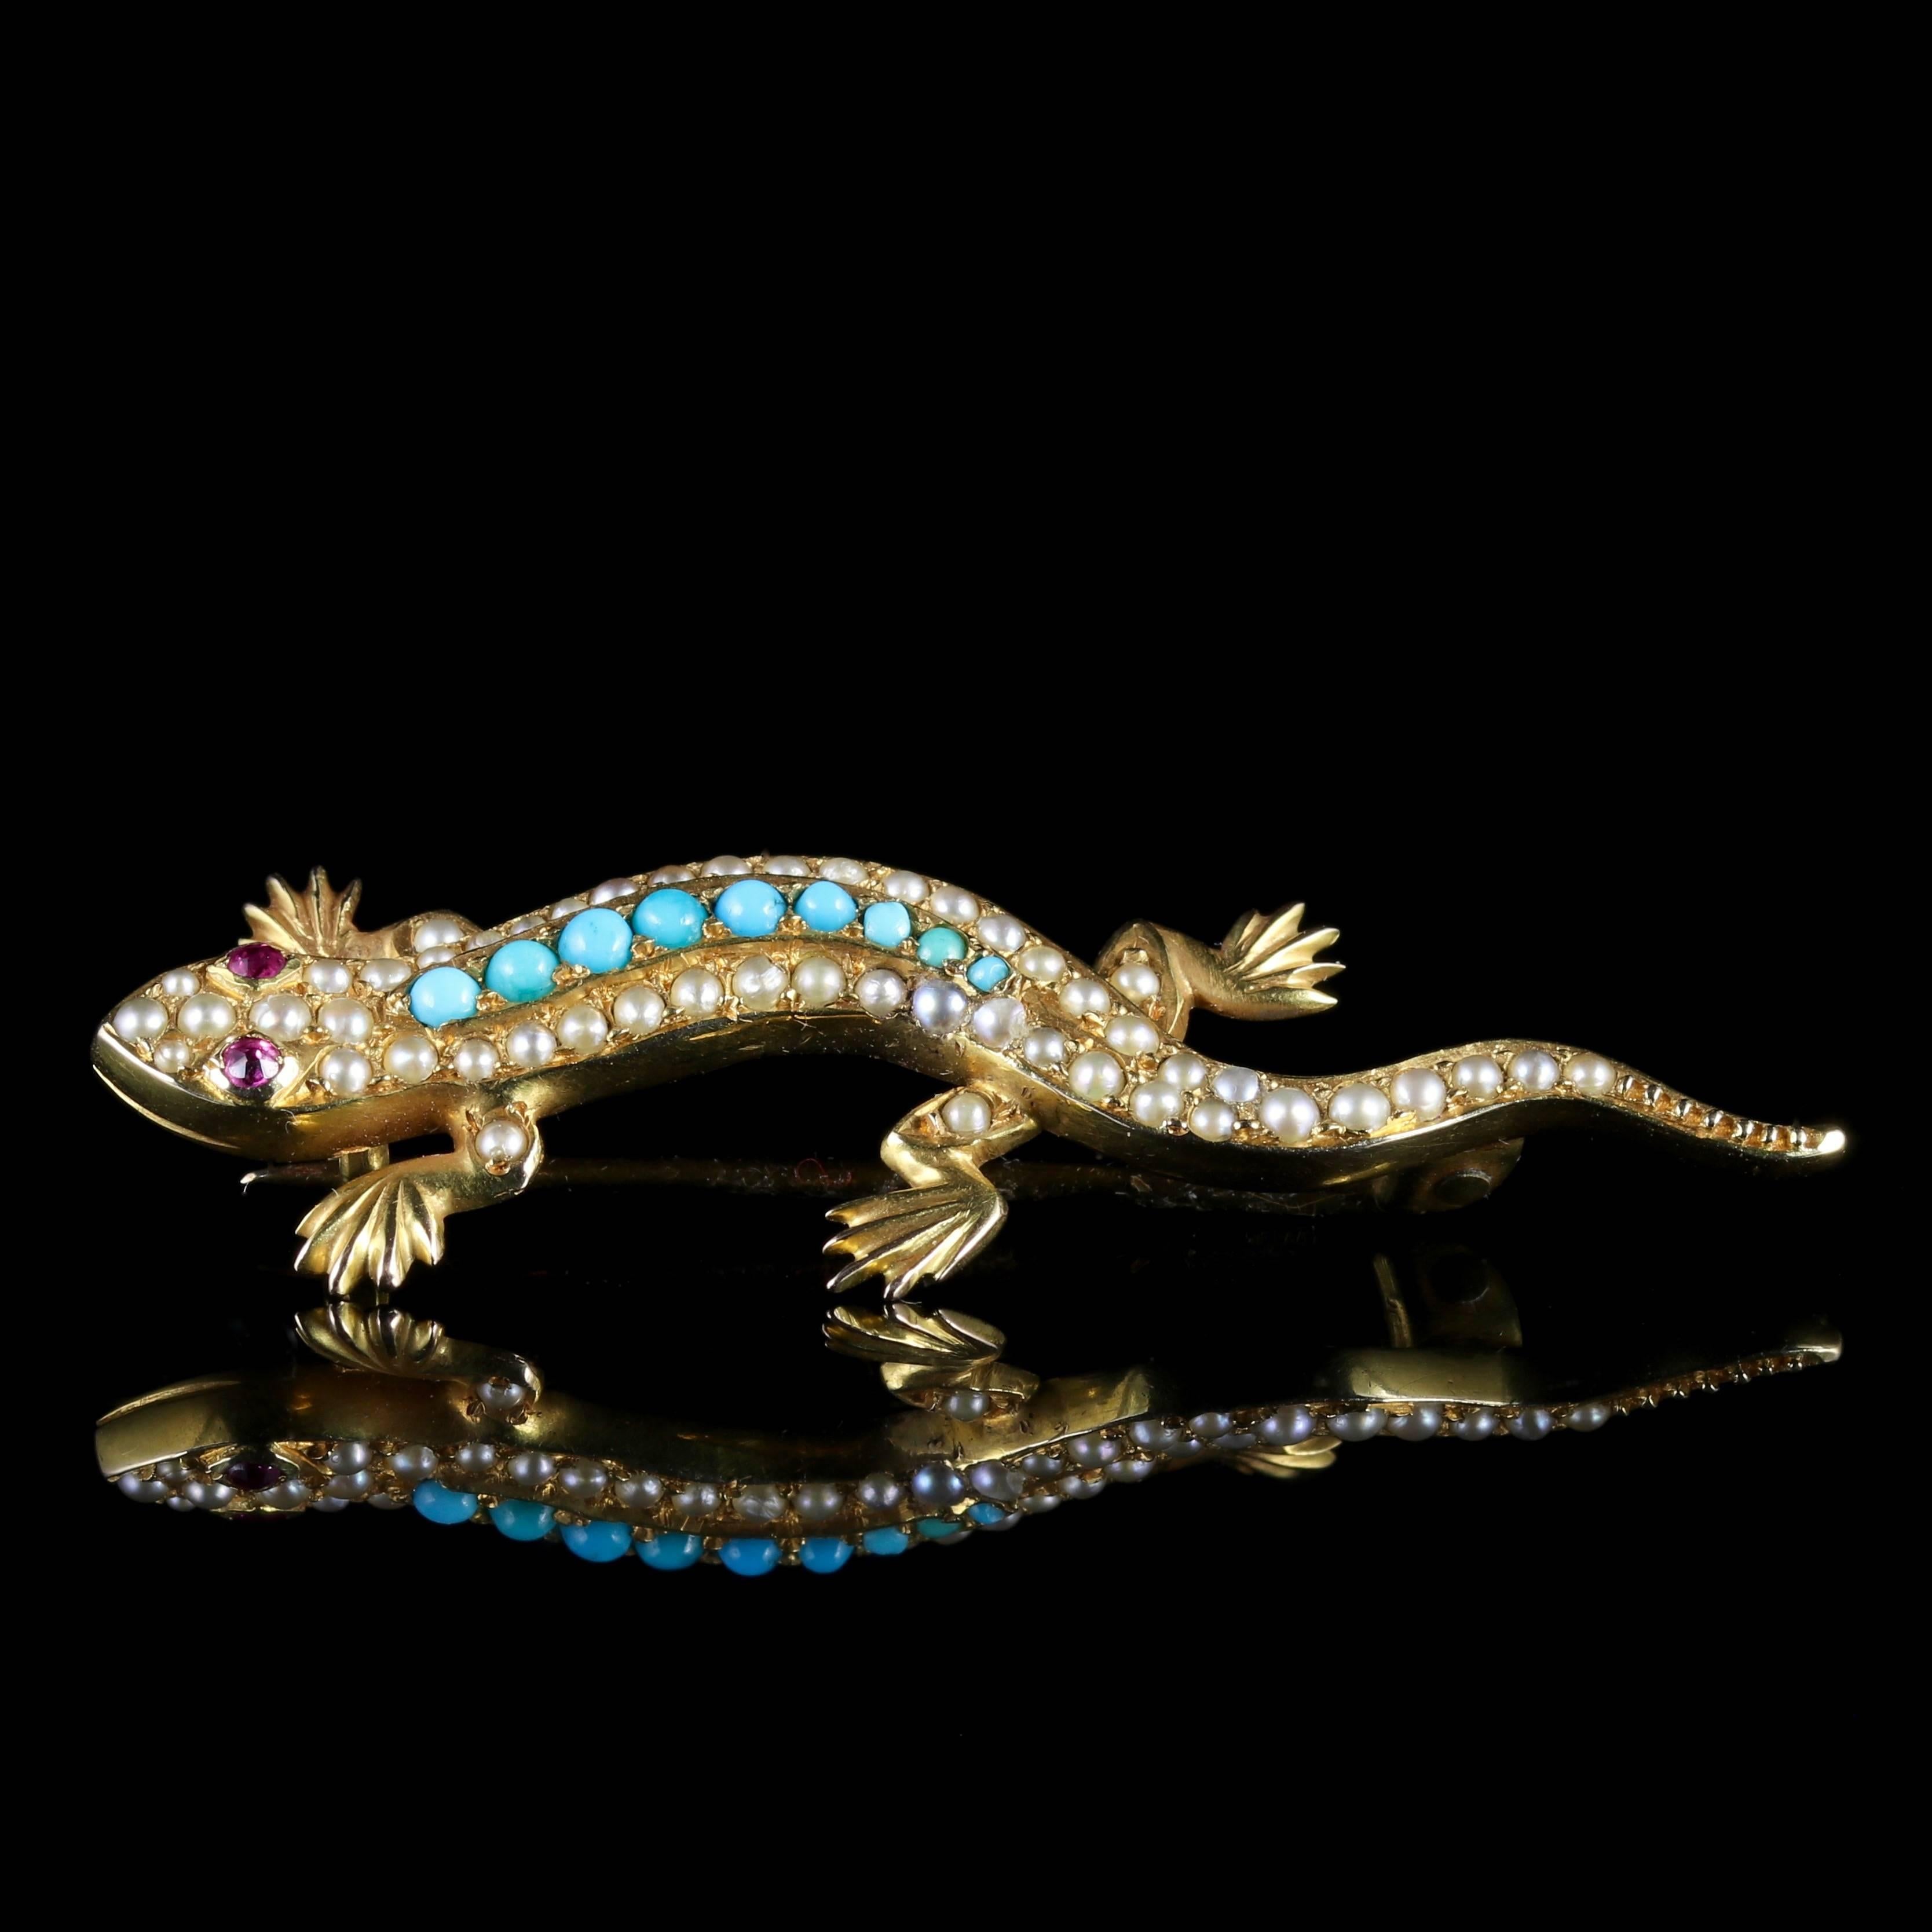 Antique Victorian Turquoise Pearl Lizard Brooch 15 Carat Gold 2